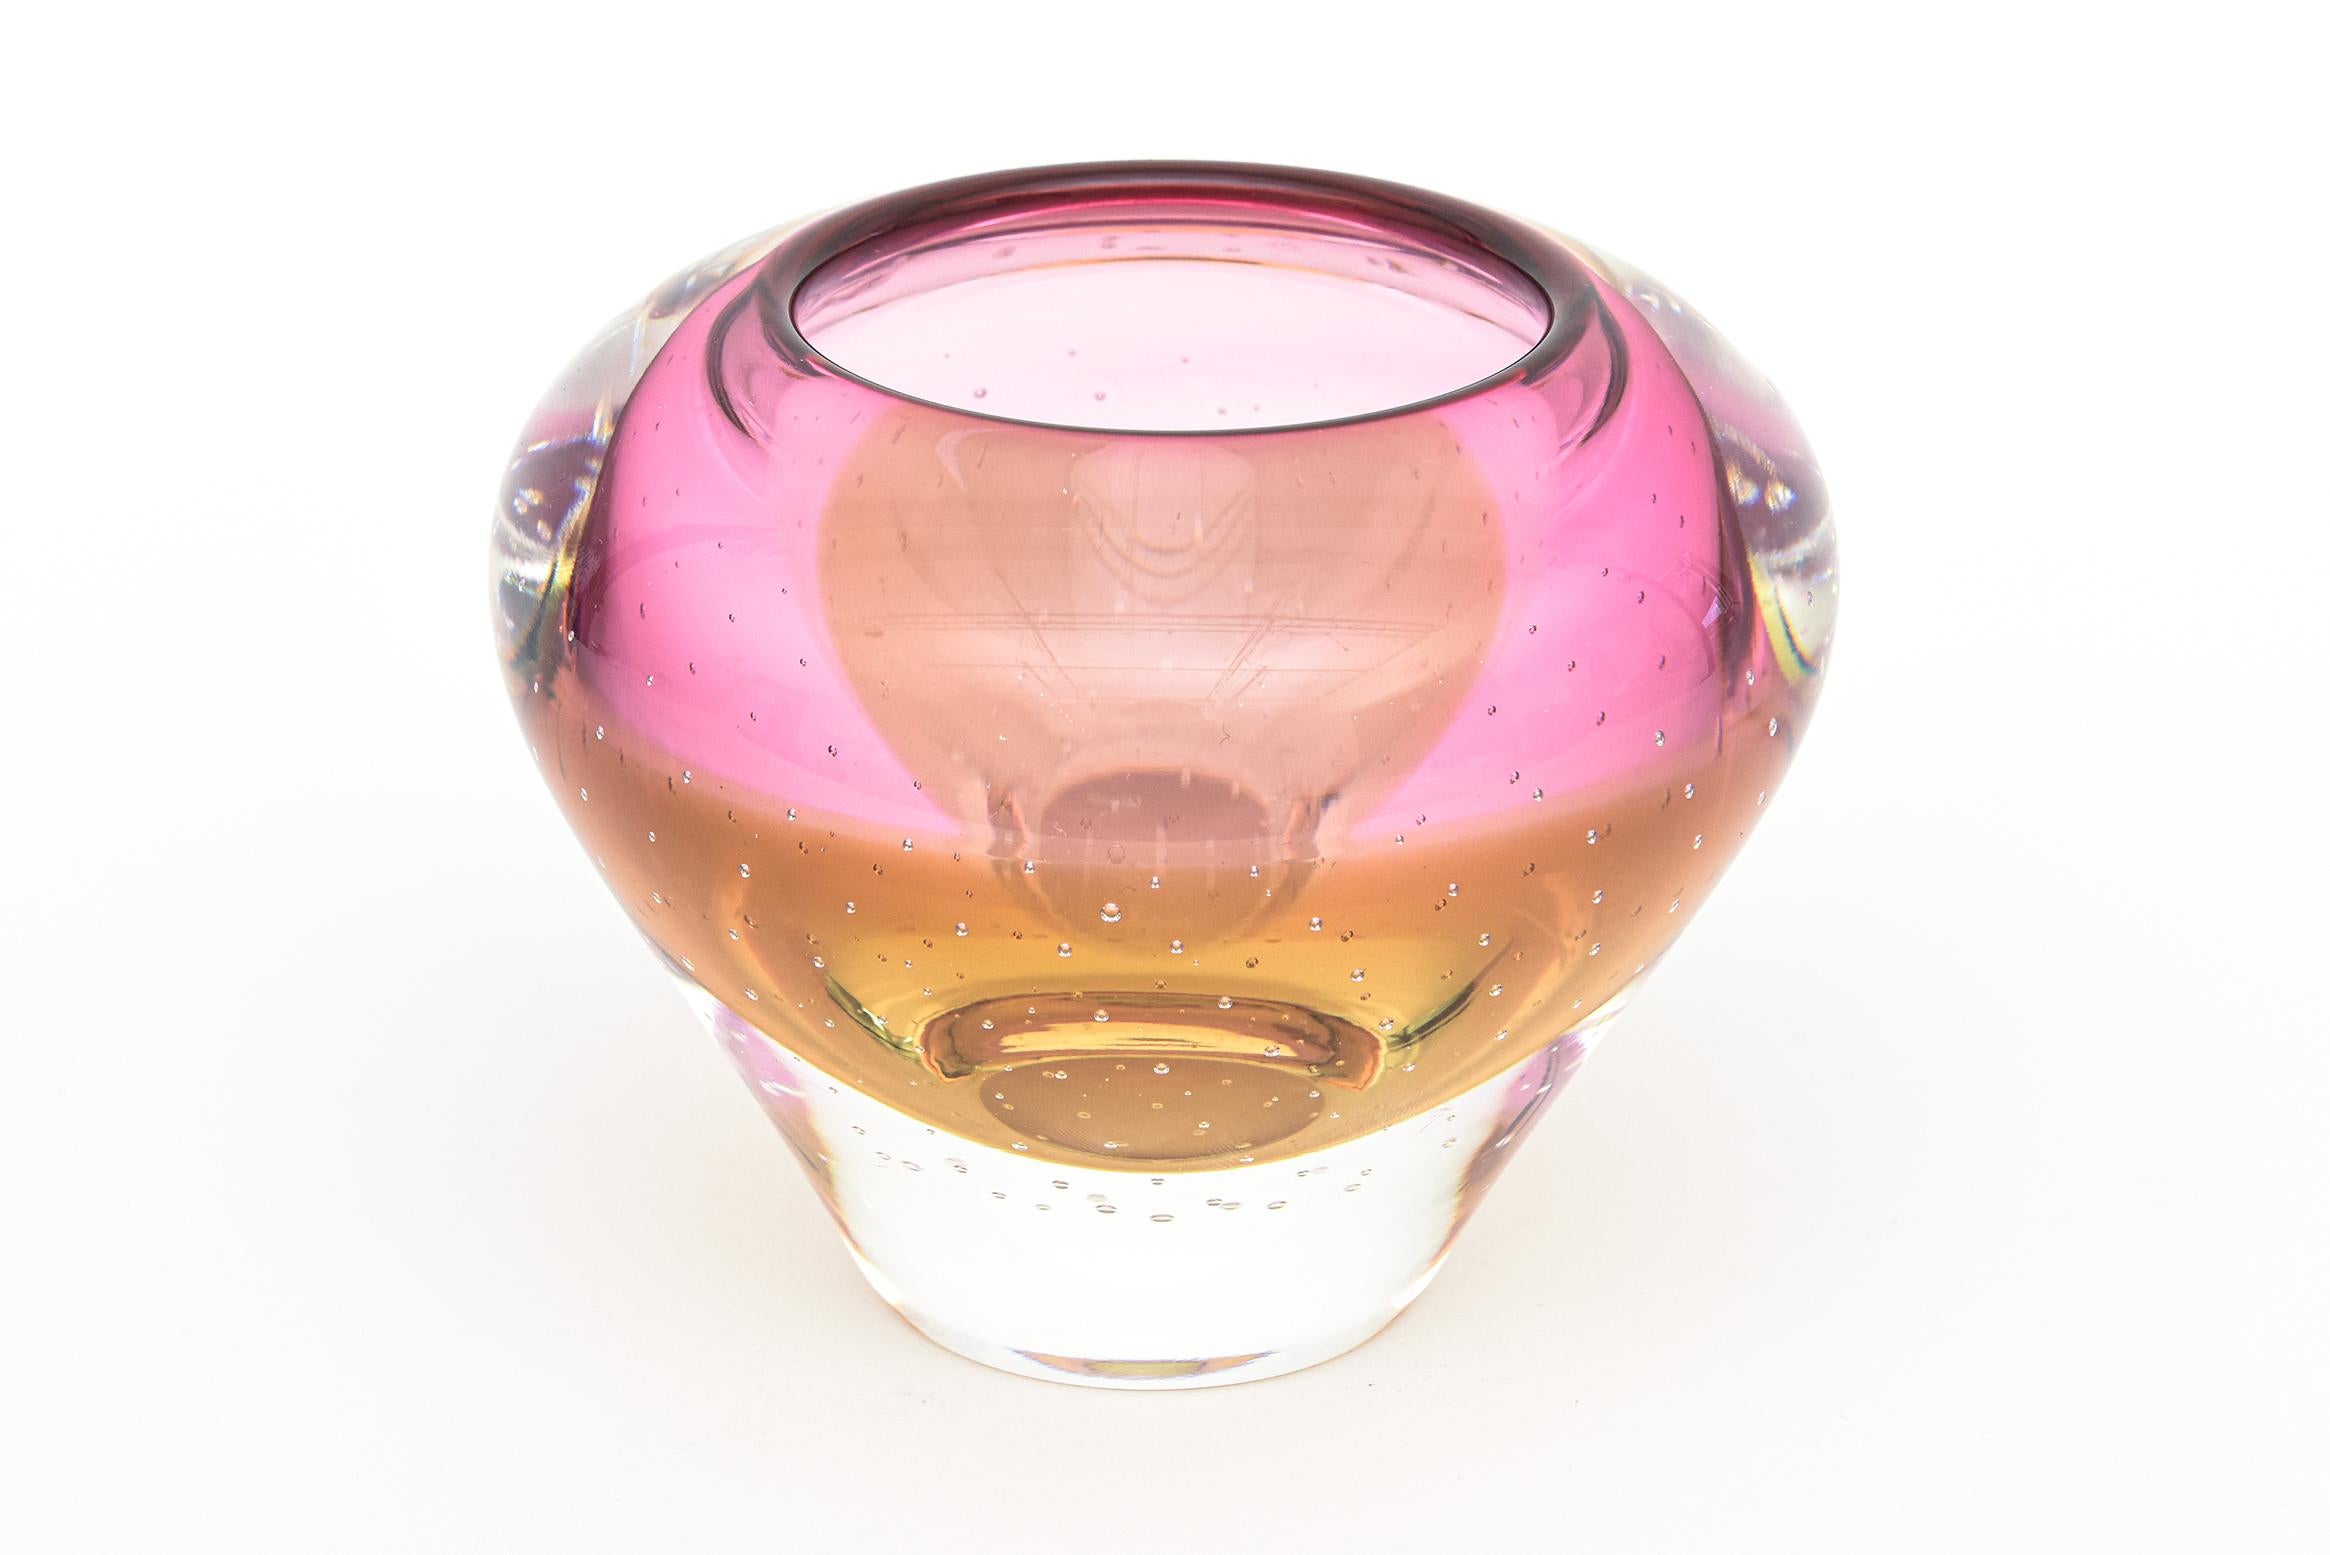 This beautiful small crystal vase is made by Waterford and is from the Evolution series. It was produced in Poland as stated on the label. Signed and labeled. From the 1990's.
It has tiny bullecante bubbles with hues of pink to amber to clear. It